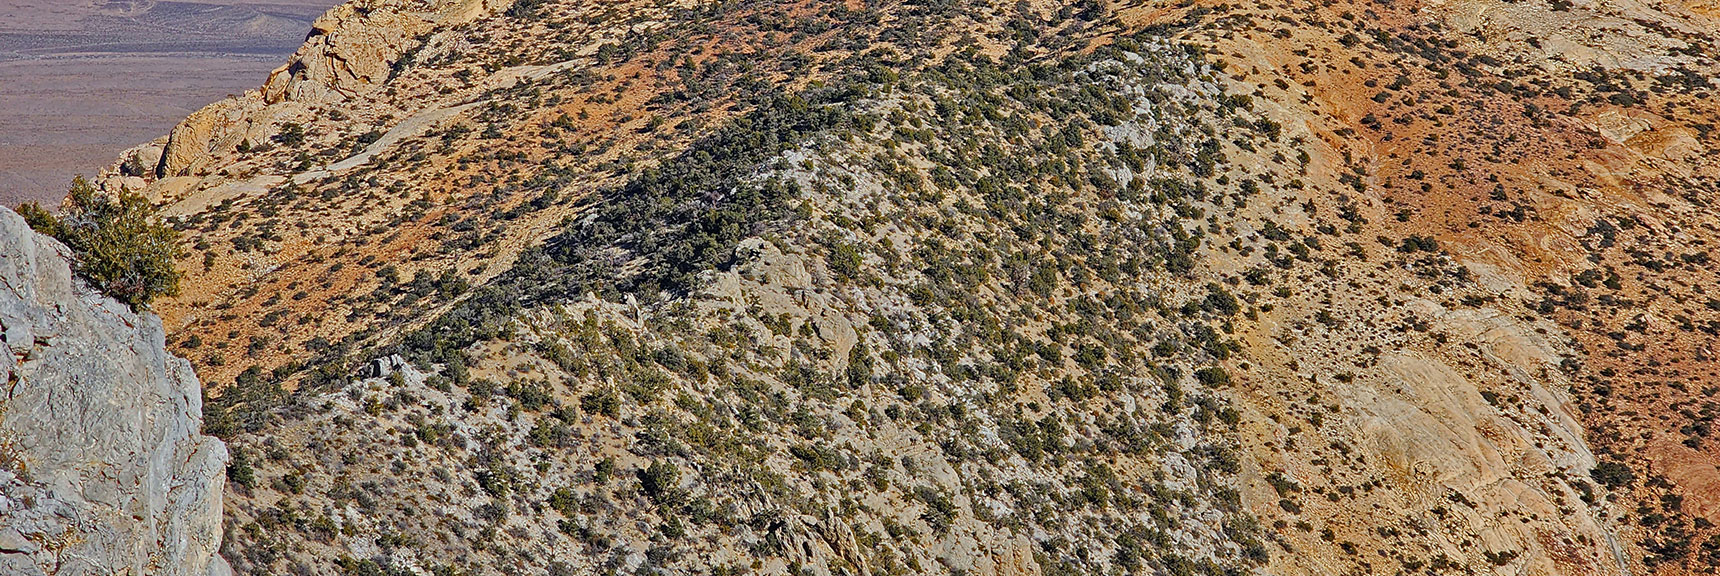 Zoom in on Mt. Wilson Approach Ridge. | Rainbow Mountains Mid Upper Crest Ridgeline from Lovell Canyon, Nevada